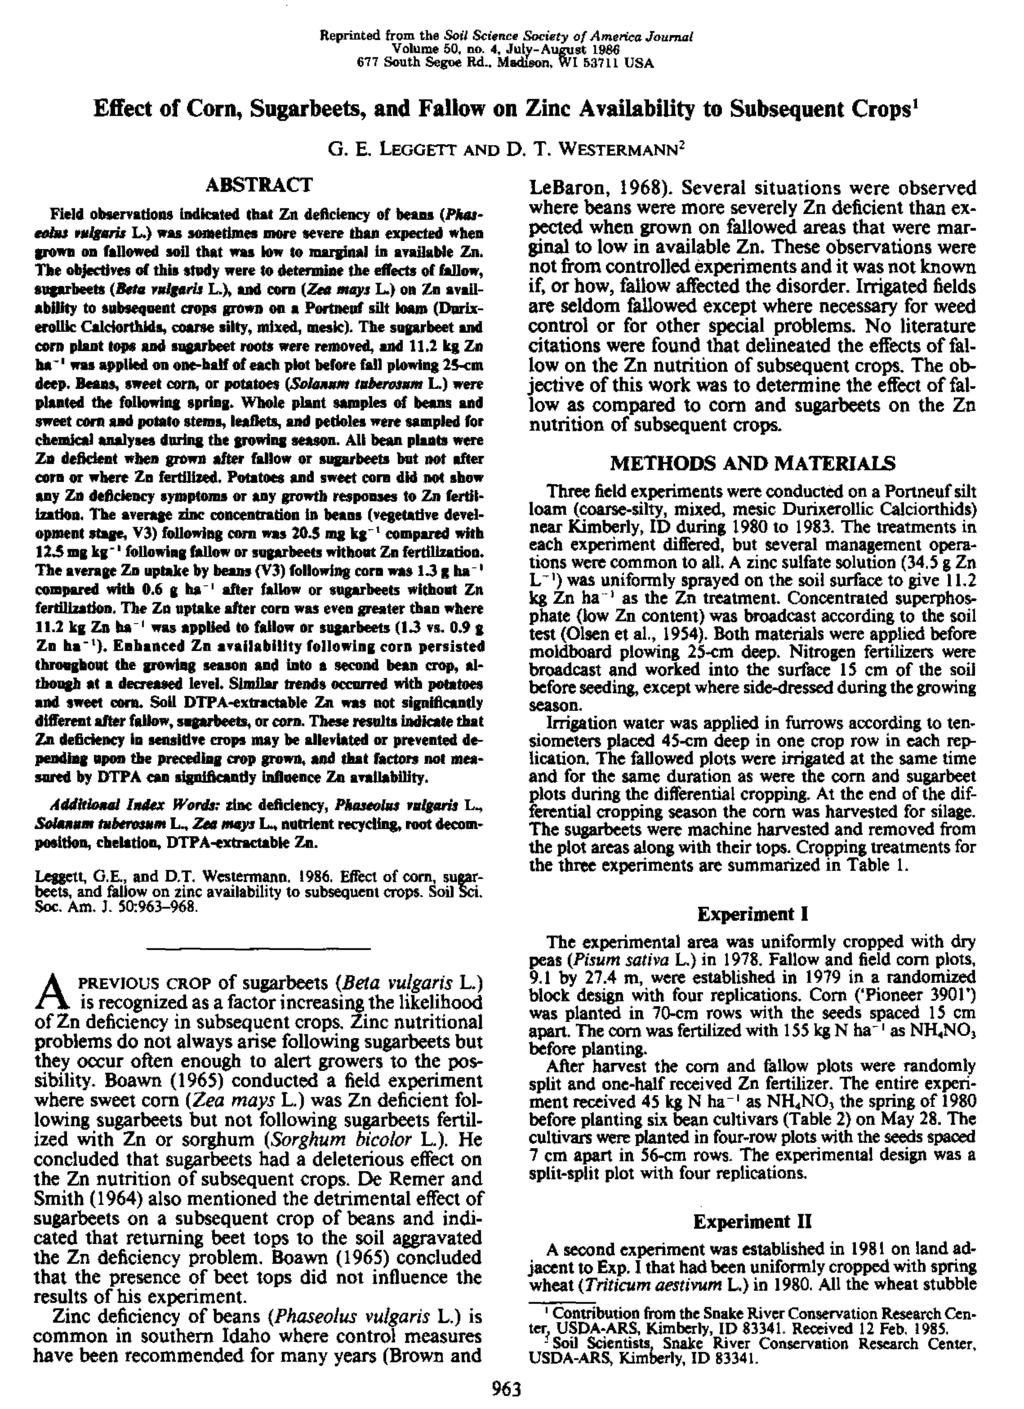 Reprinted from the Soil Science Society of America Journal Volume 50, no. 4, duly-august 1986 677 South Segue Rd.